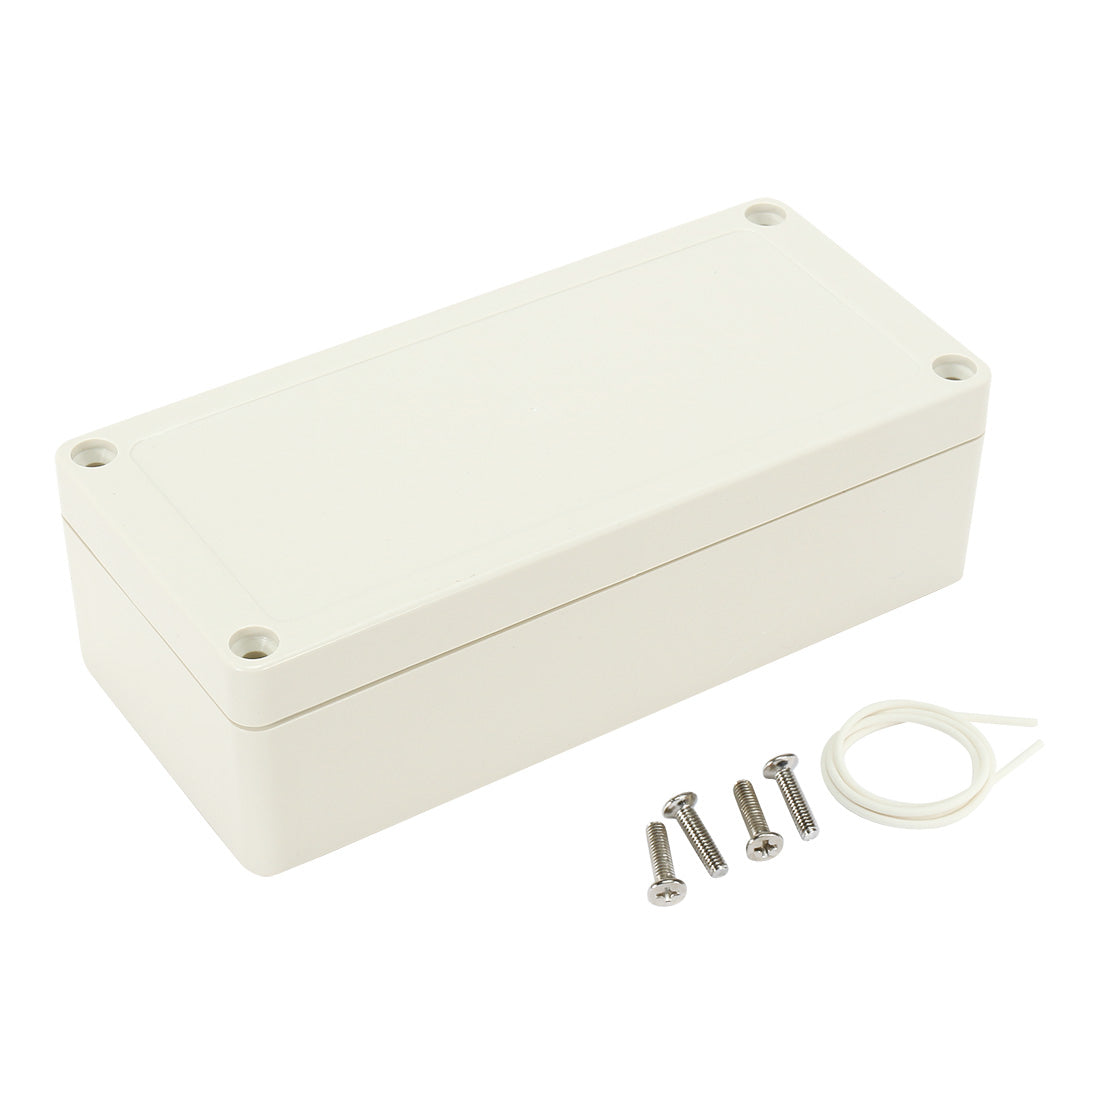 uxcell Uxcell 5.9"x2.76"x1.85"(150mmx70mmx47mm) ABS Junction Box Universal Electric Project Enclosure